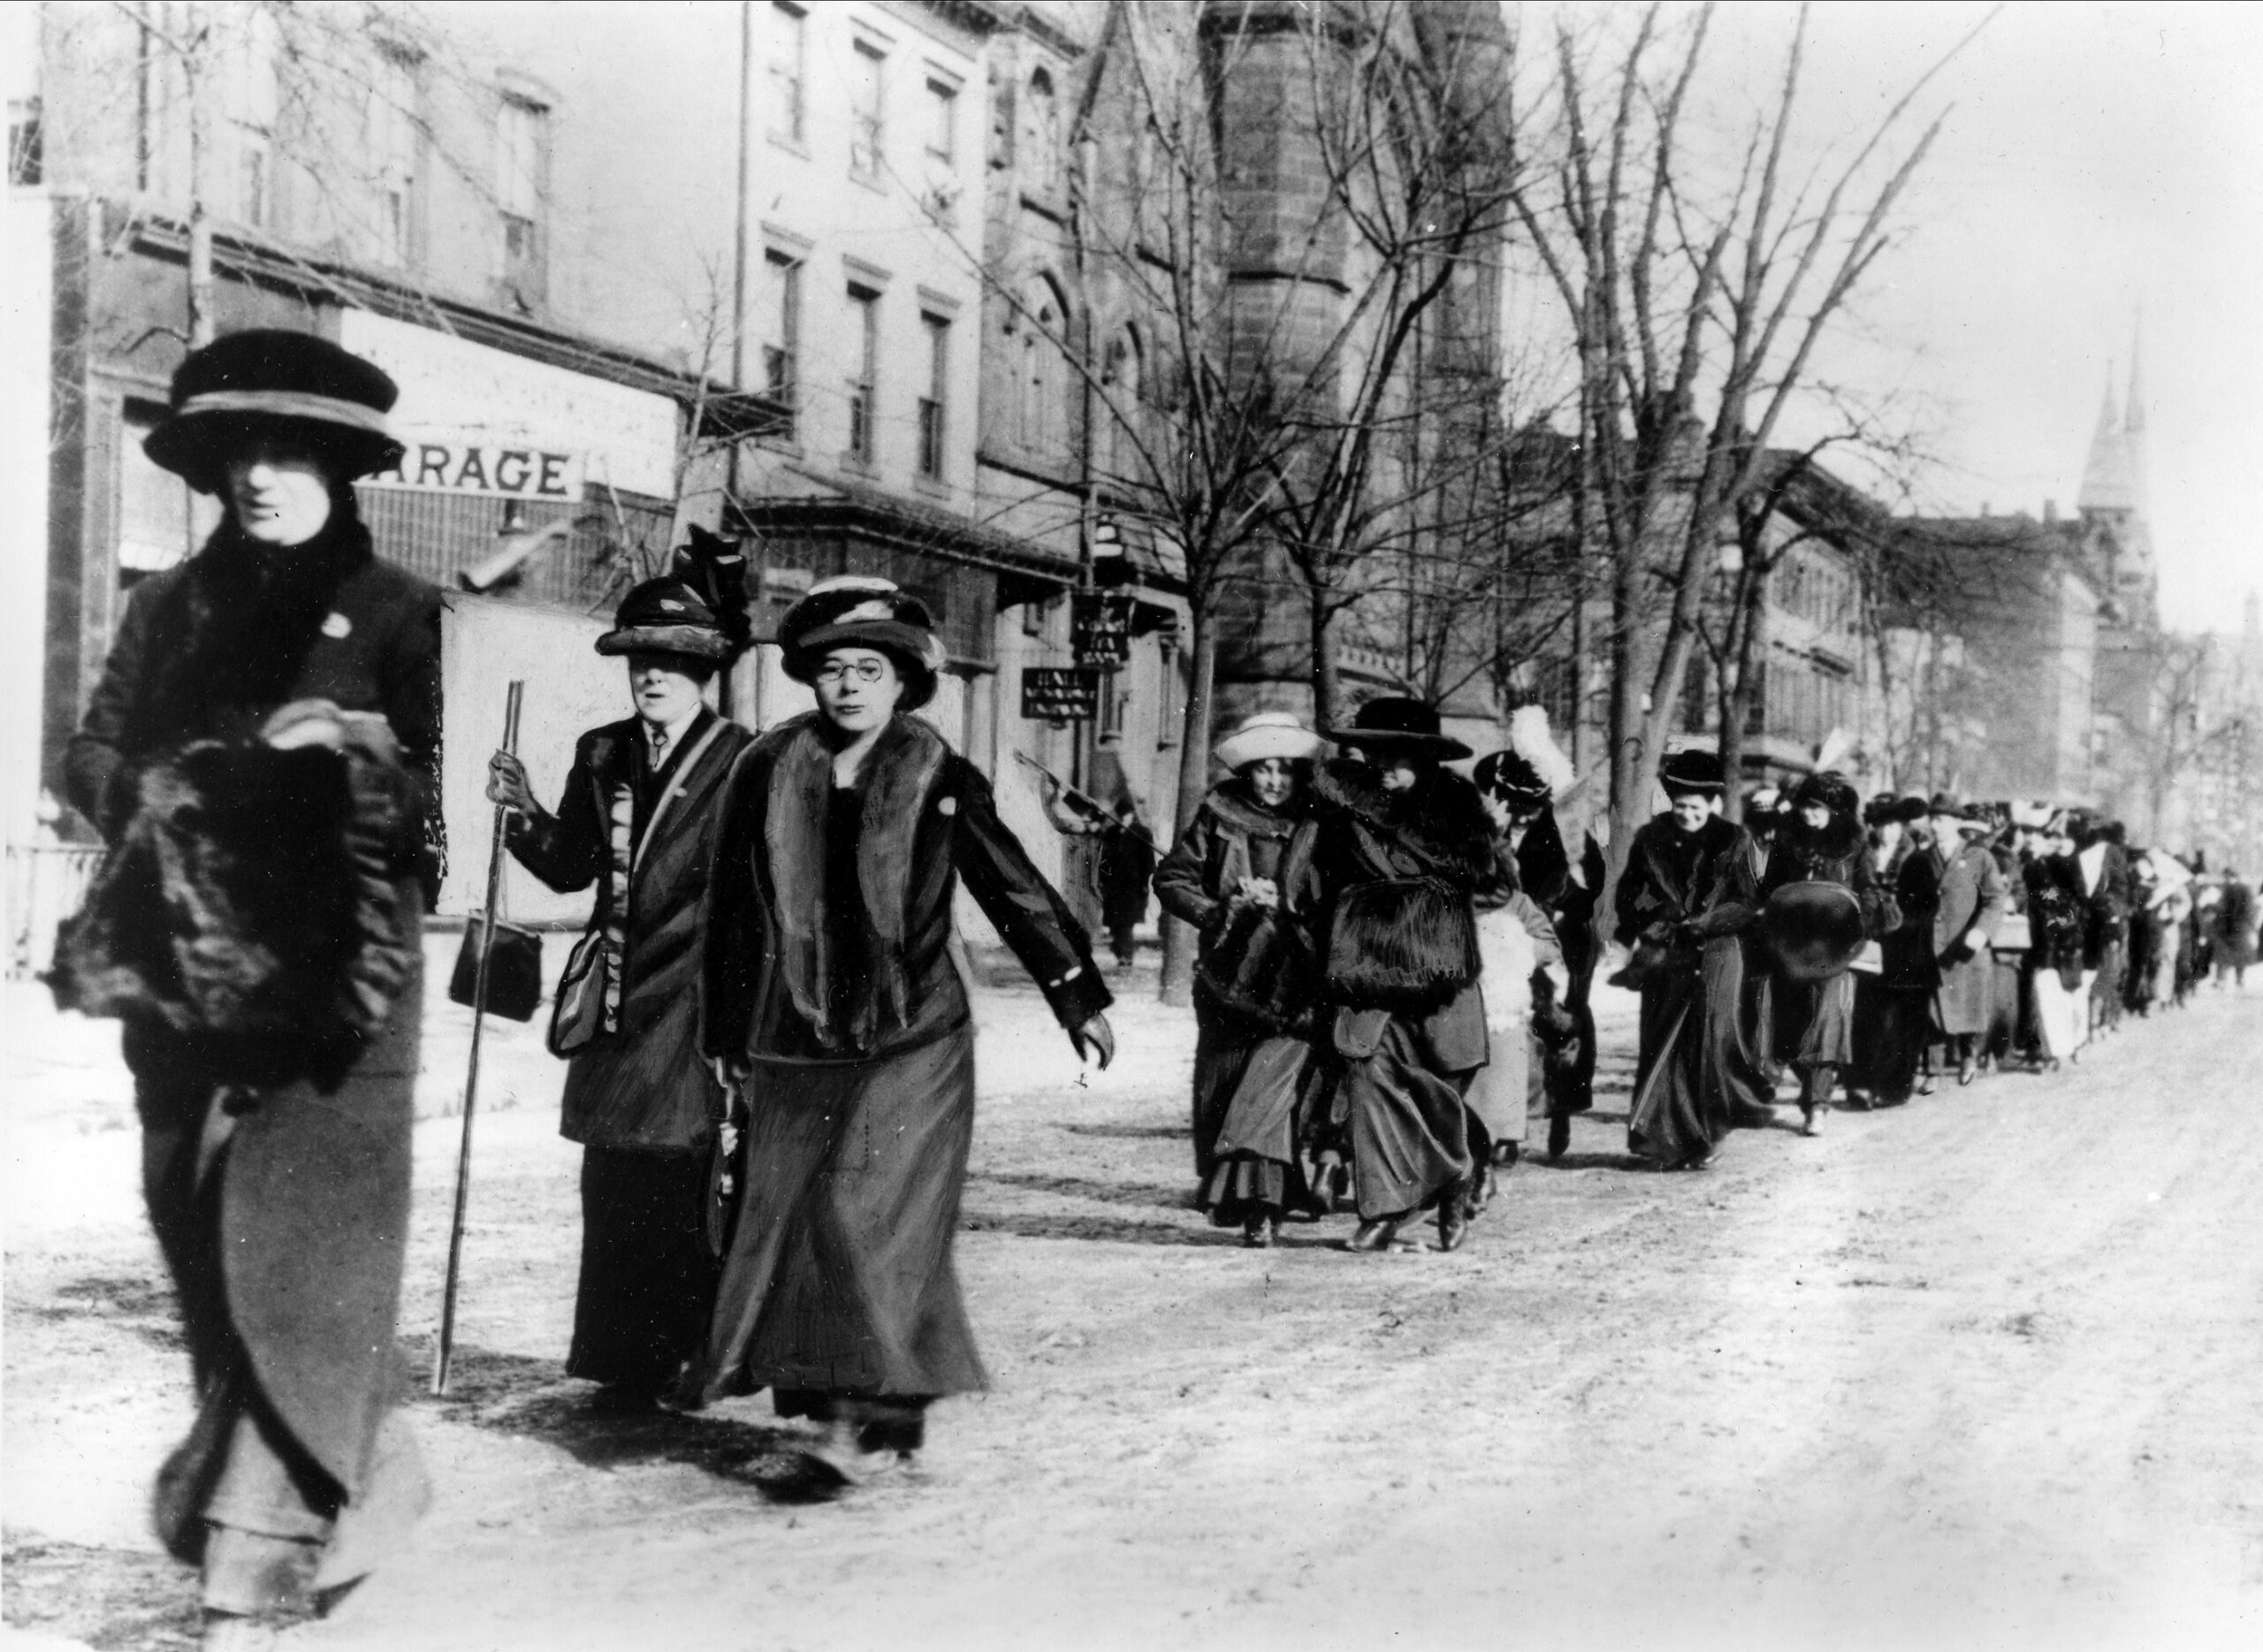 Suffragists march in New York